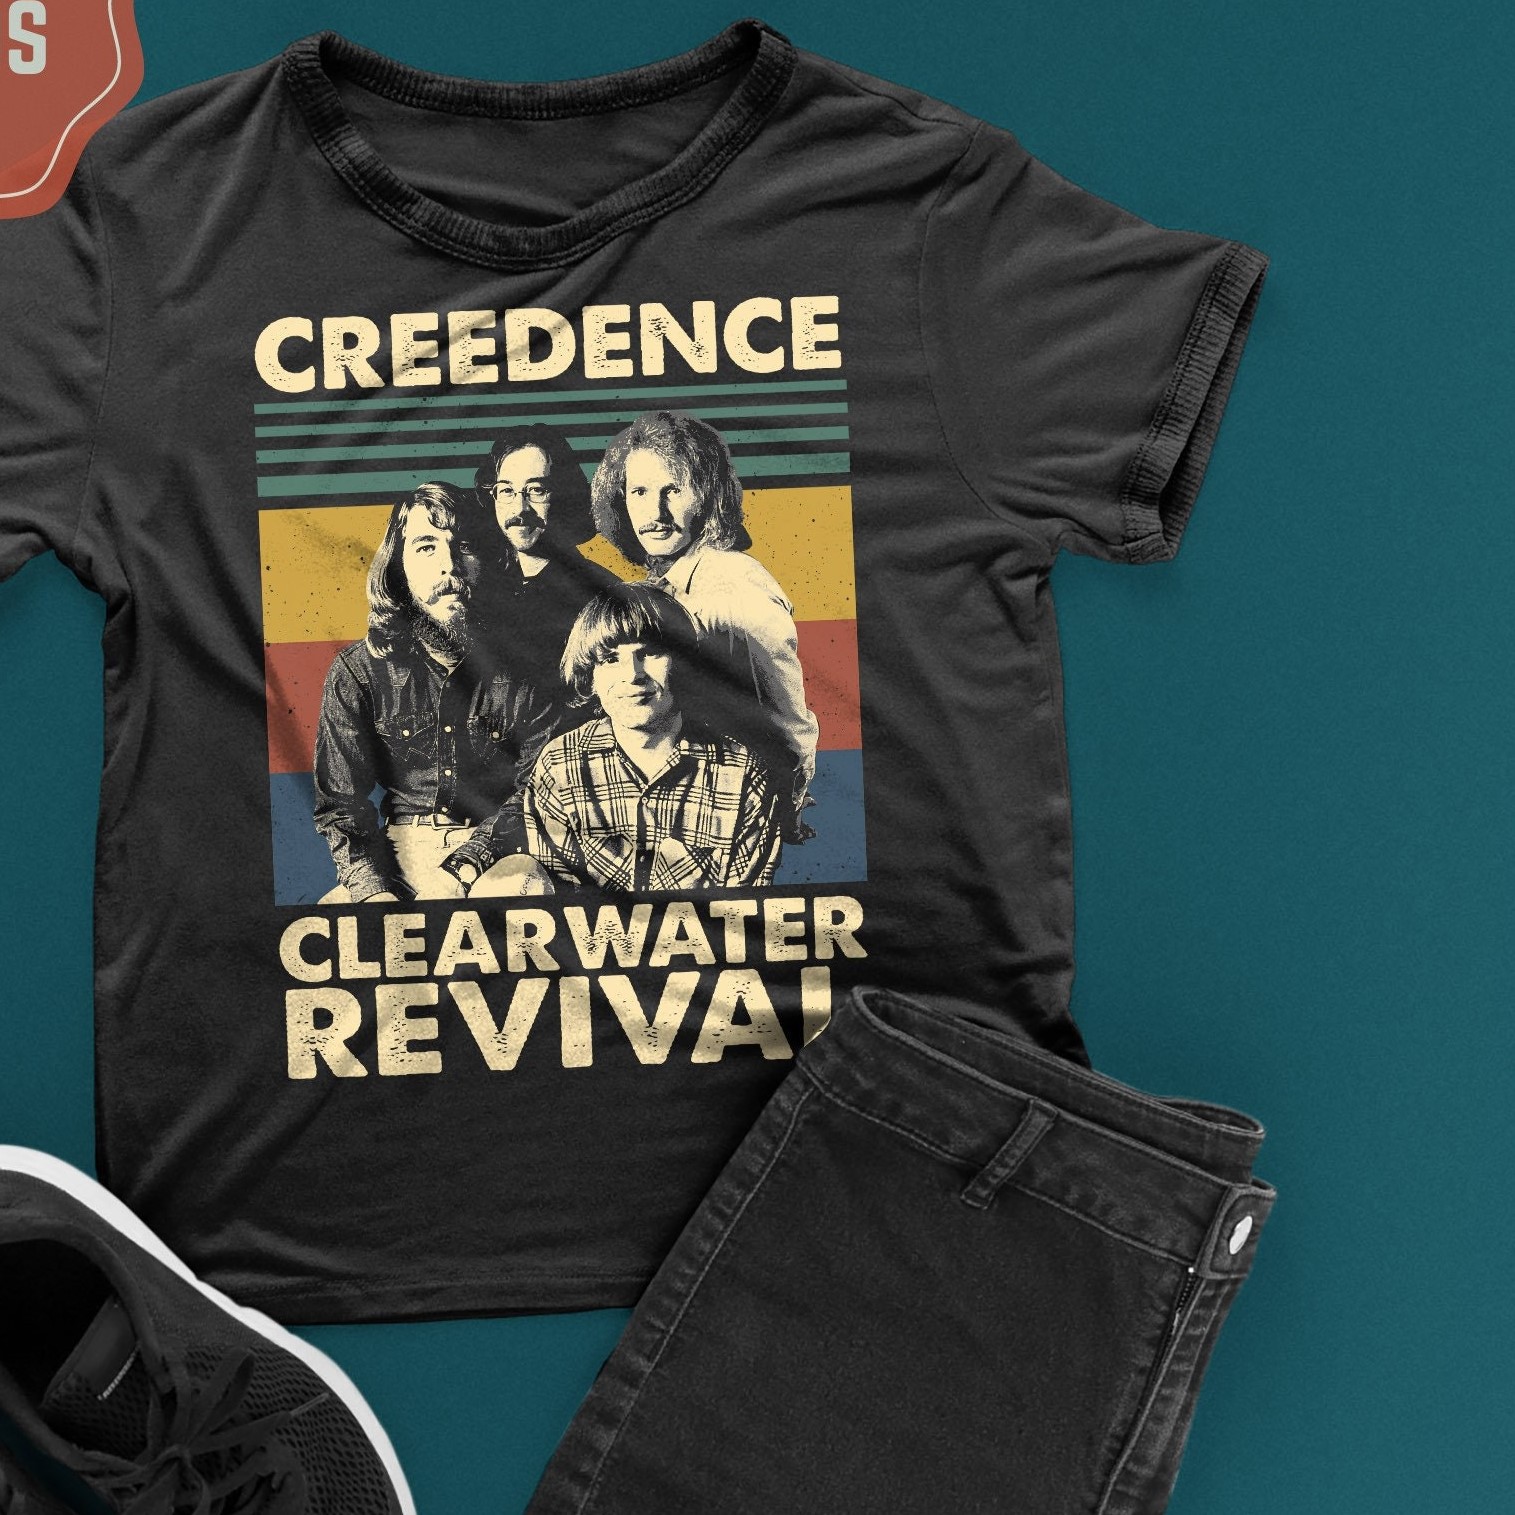 Vintage Style Creedence Clearwater Revival Unisex T-Shirt